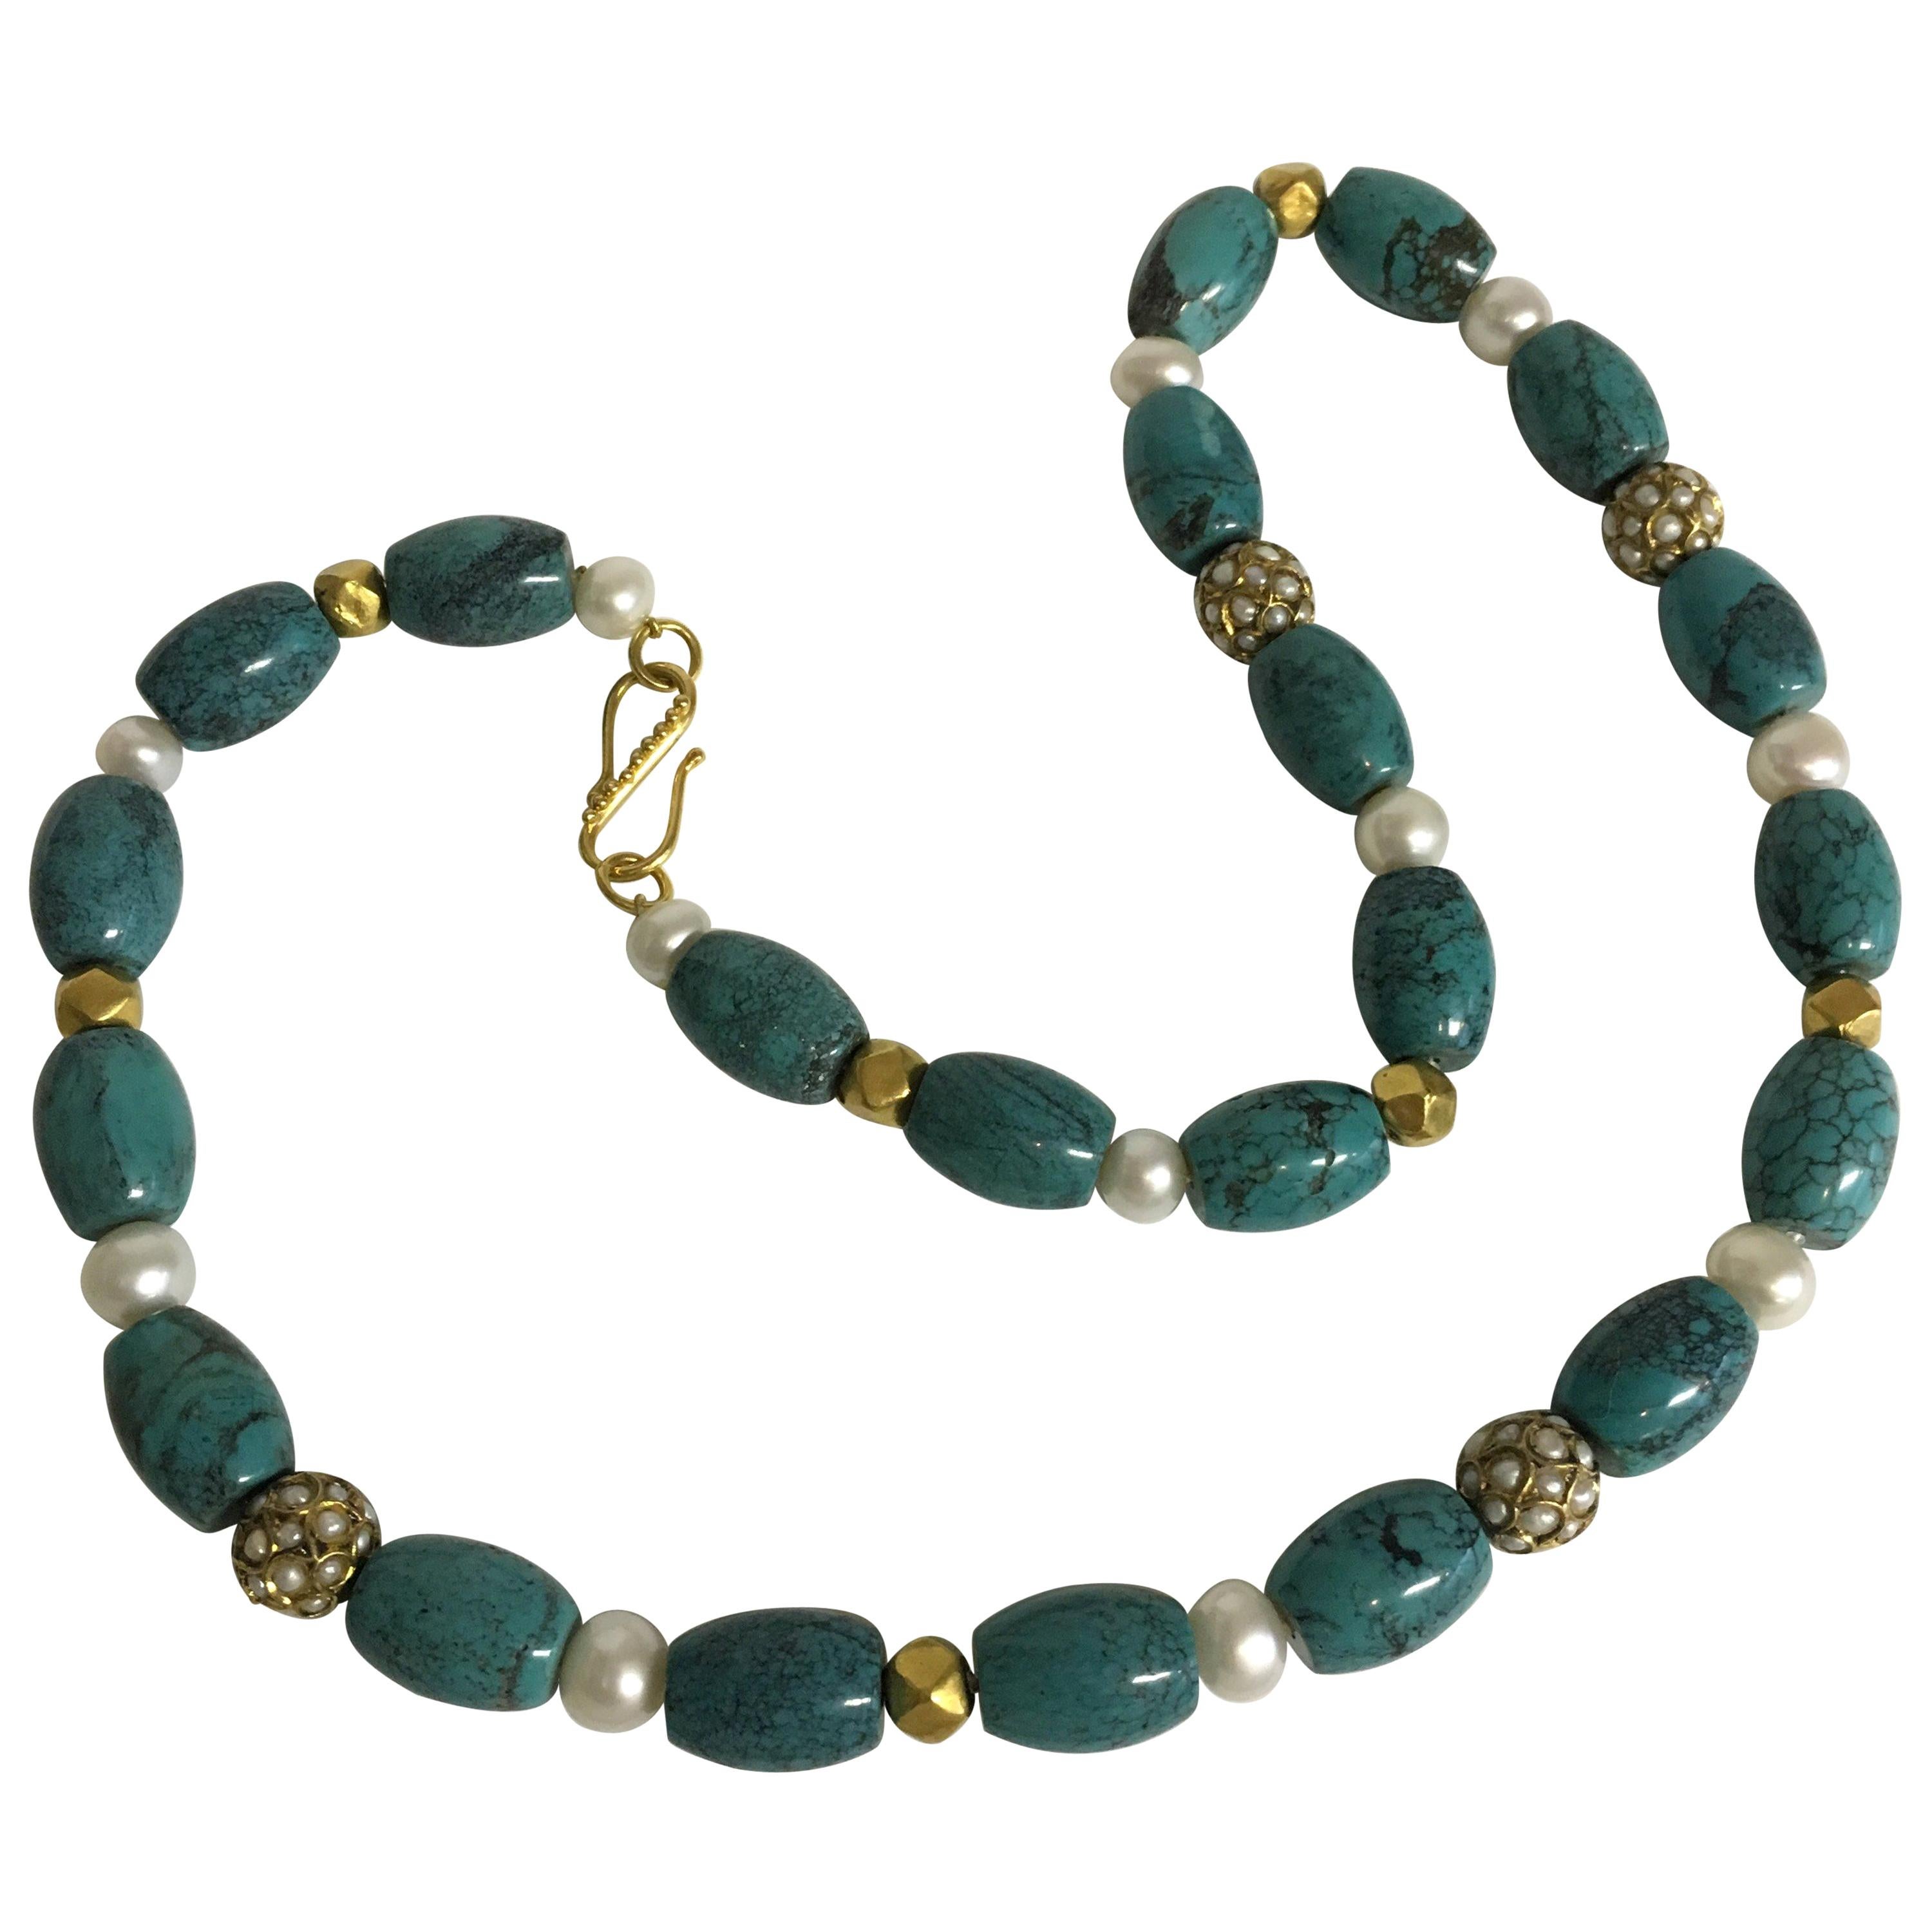 Necklace Tibetan Turquoise, Freshwater Pearls Seed Pearl and 18 Karat Gold Beads